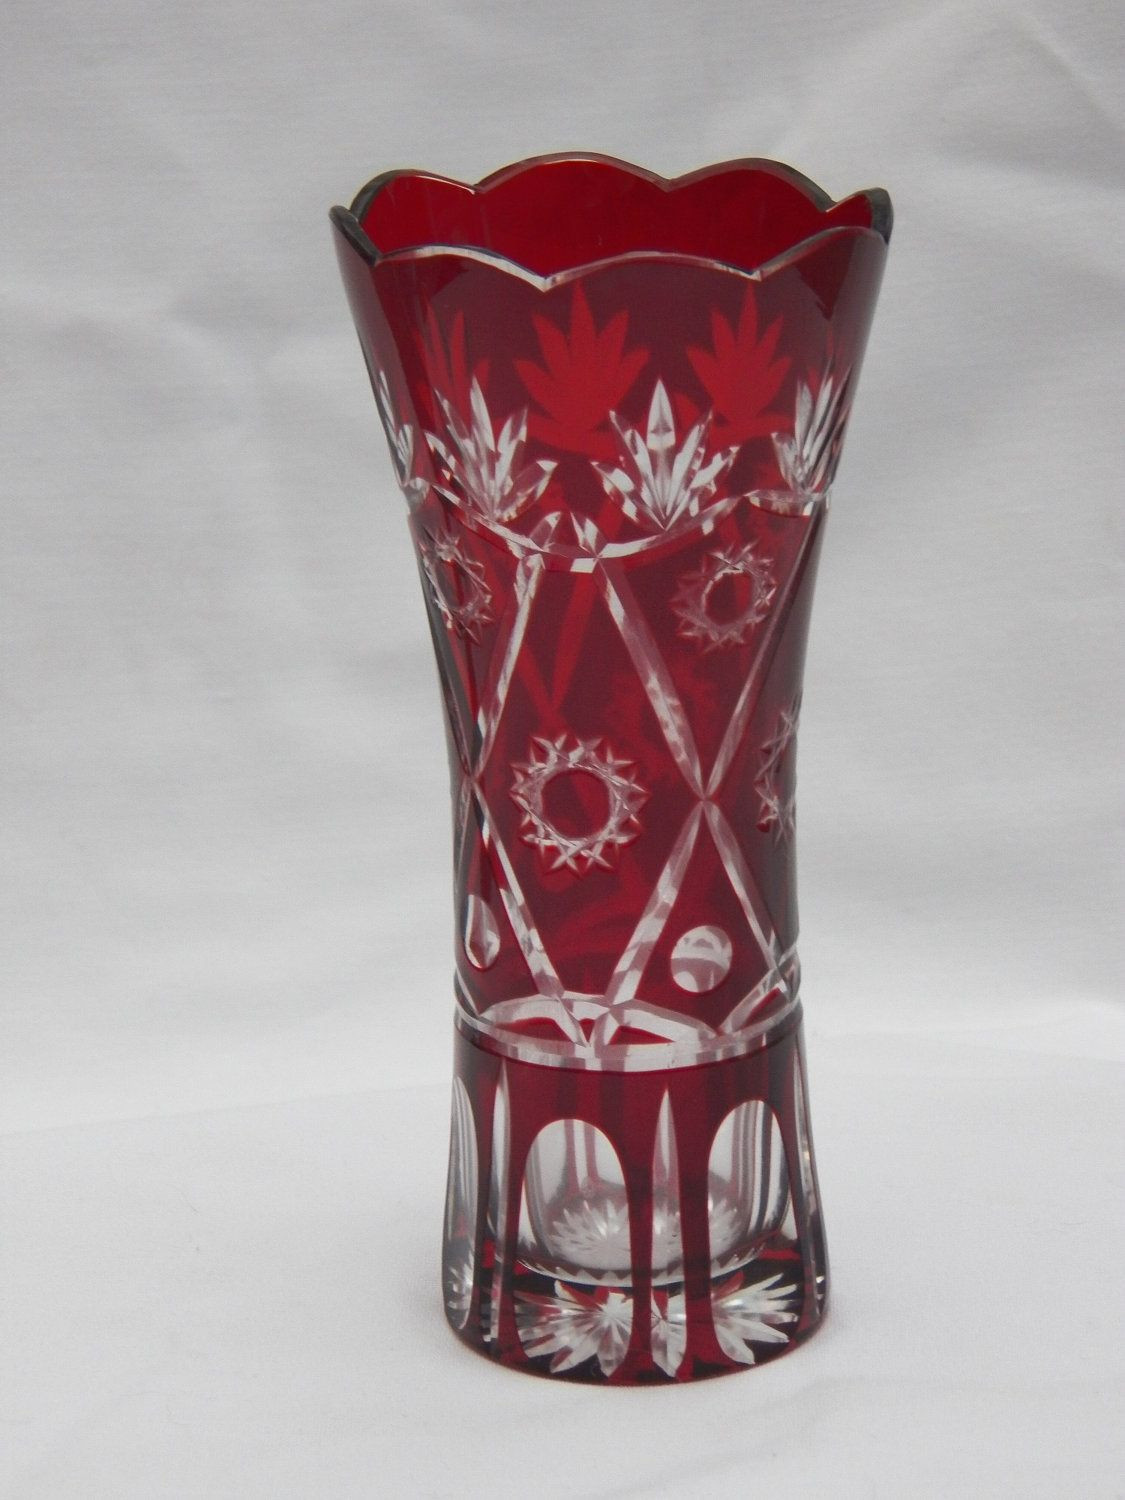 21 Spectacular Clear Glass Vase with Gold Trim 2024 free download clear glass vase with gold trim of image detail for ruby cranberry red cut to clear glass vase intended for image detail for ruby cranberry red cut to clear glass vase scalloped rim